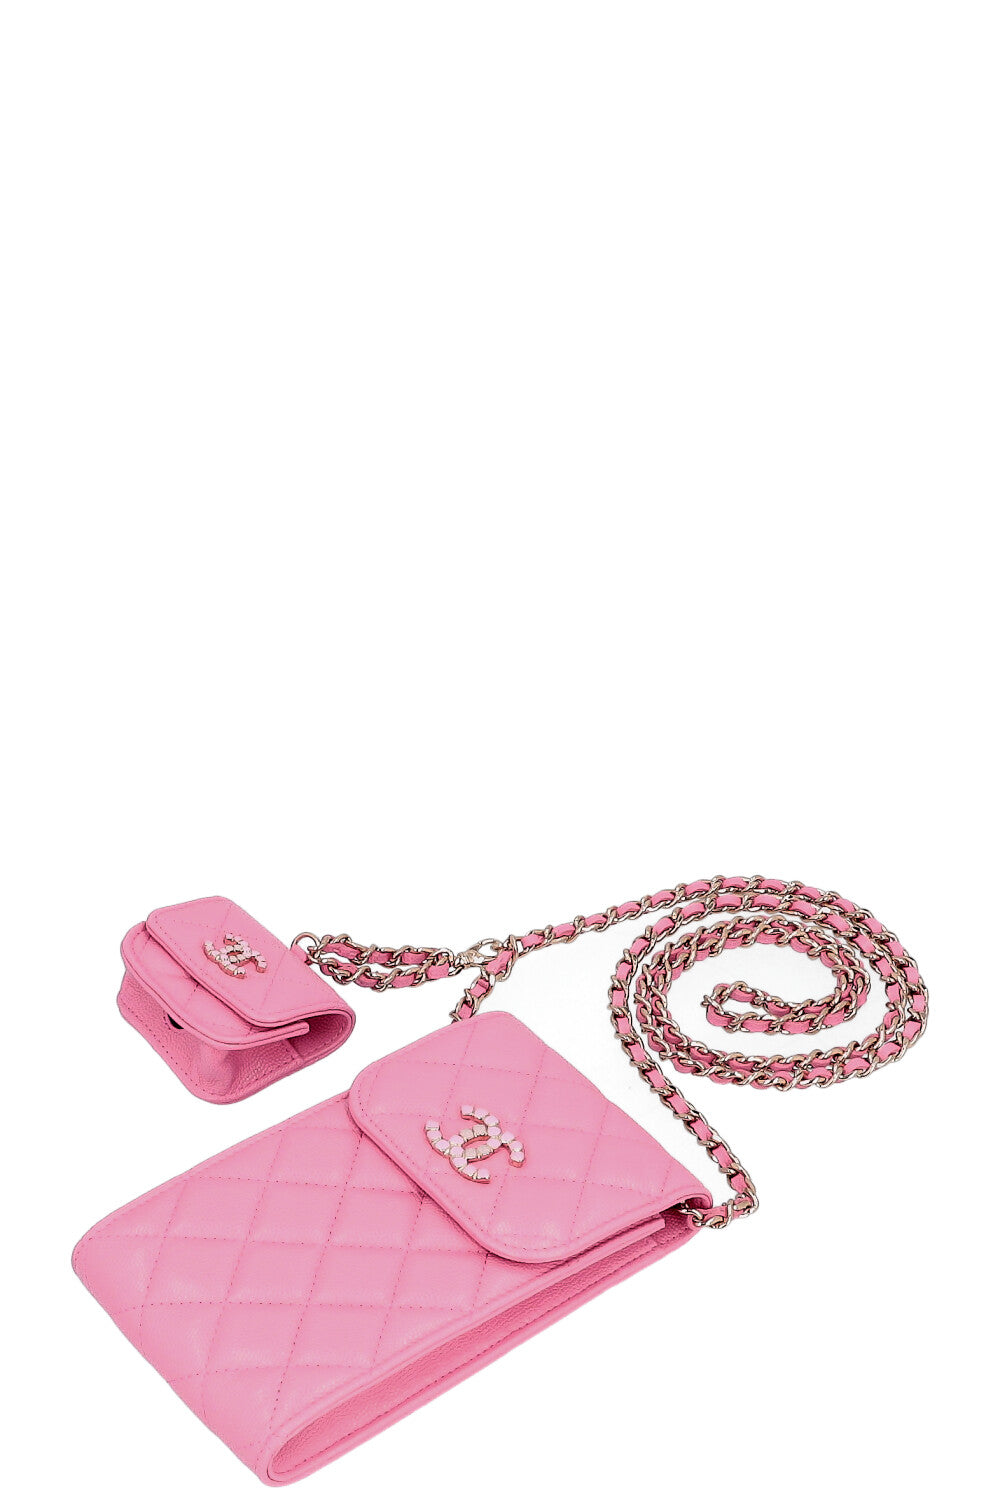 CHANEL Phone & Airpods Case